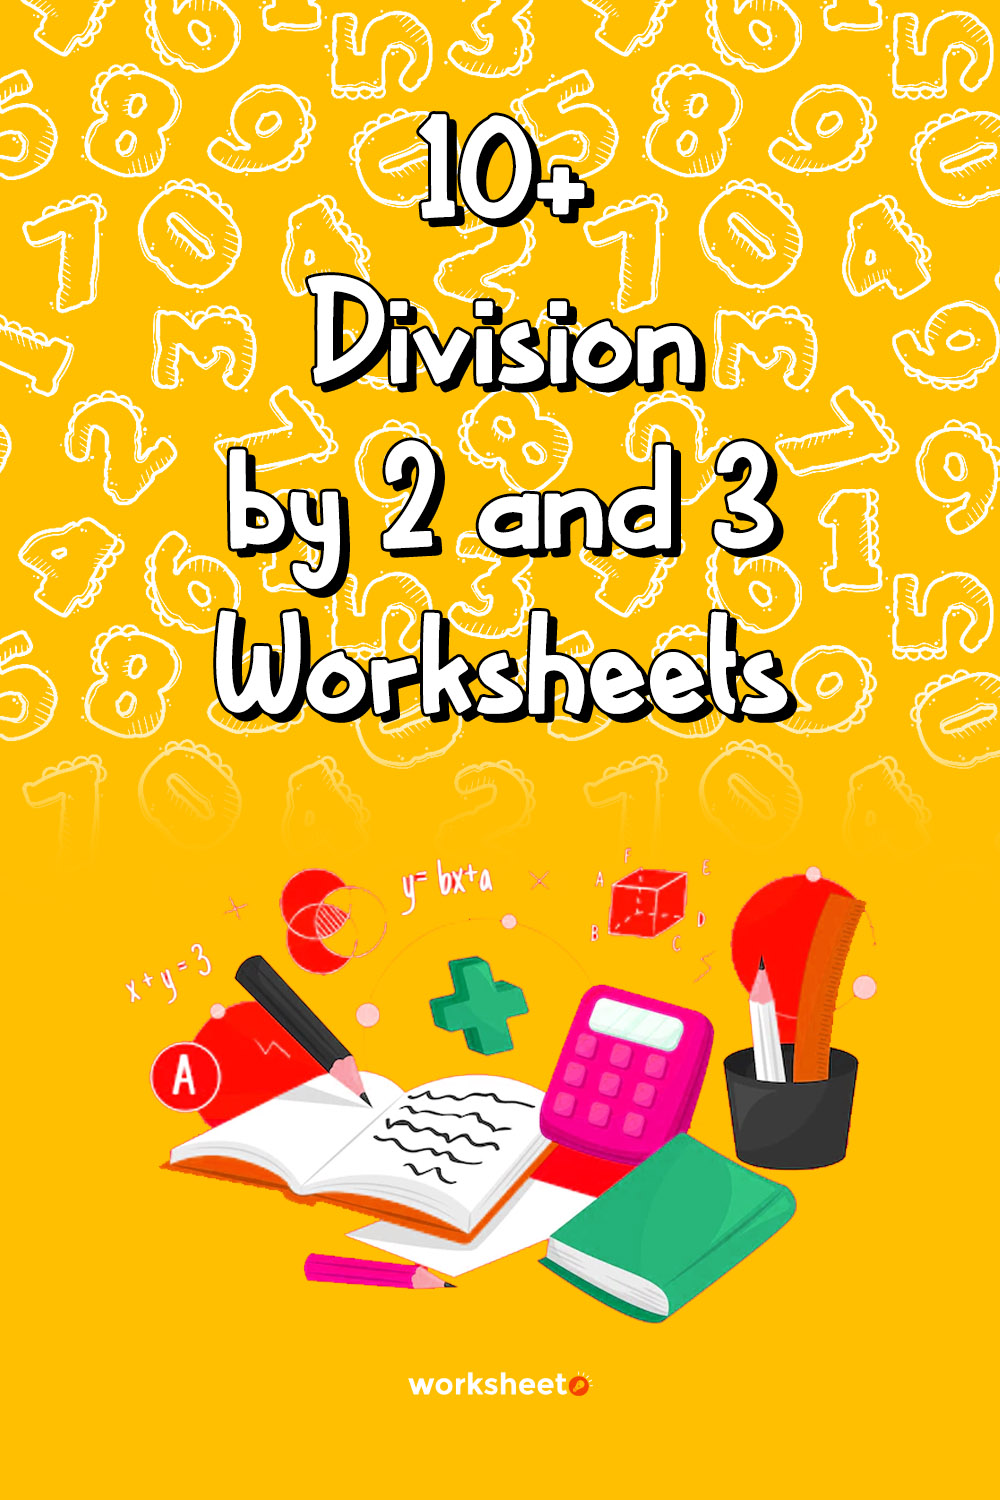 Division by 2 and 3 Worksheets